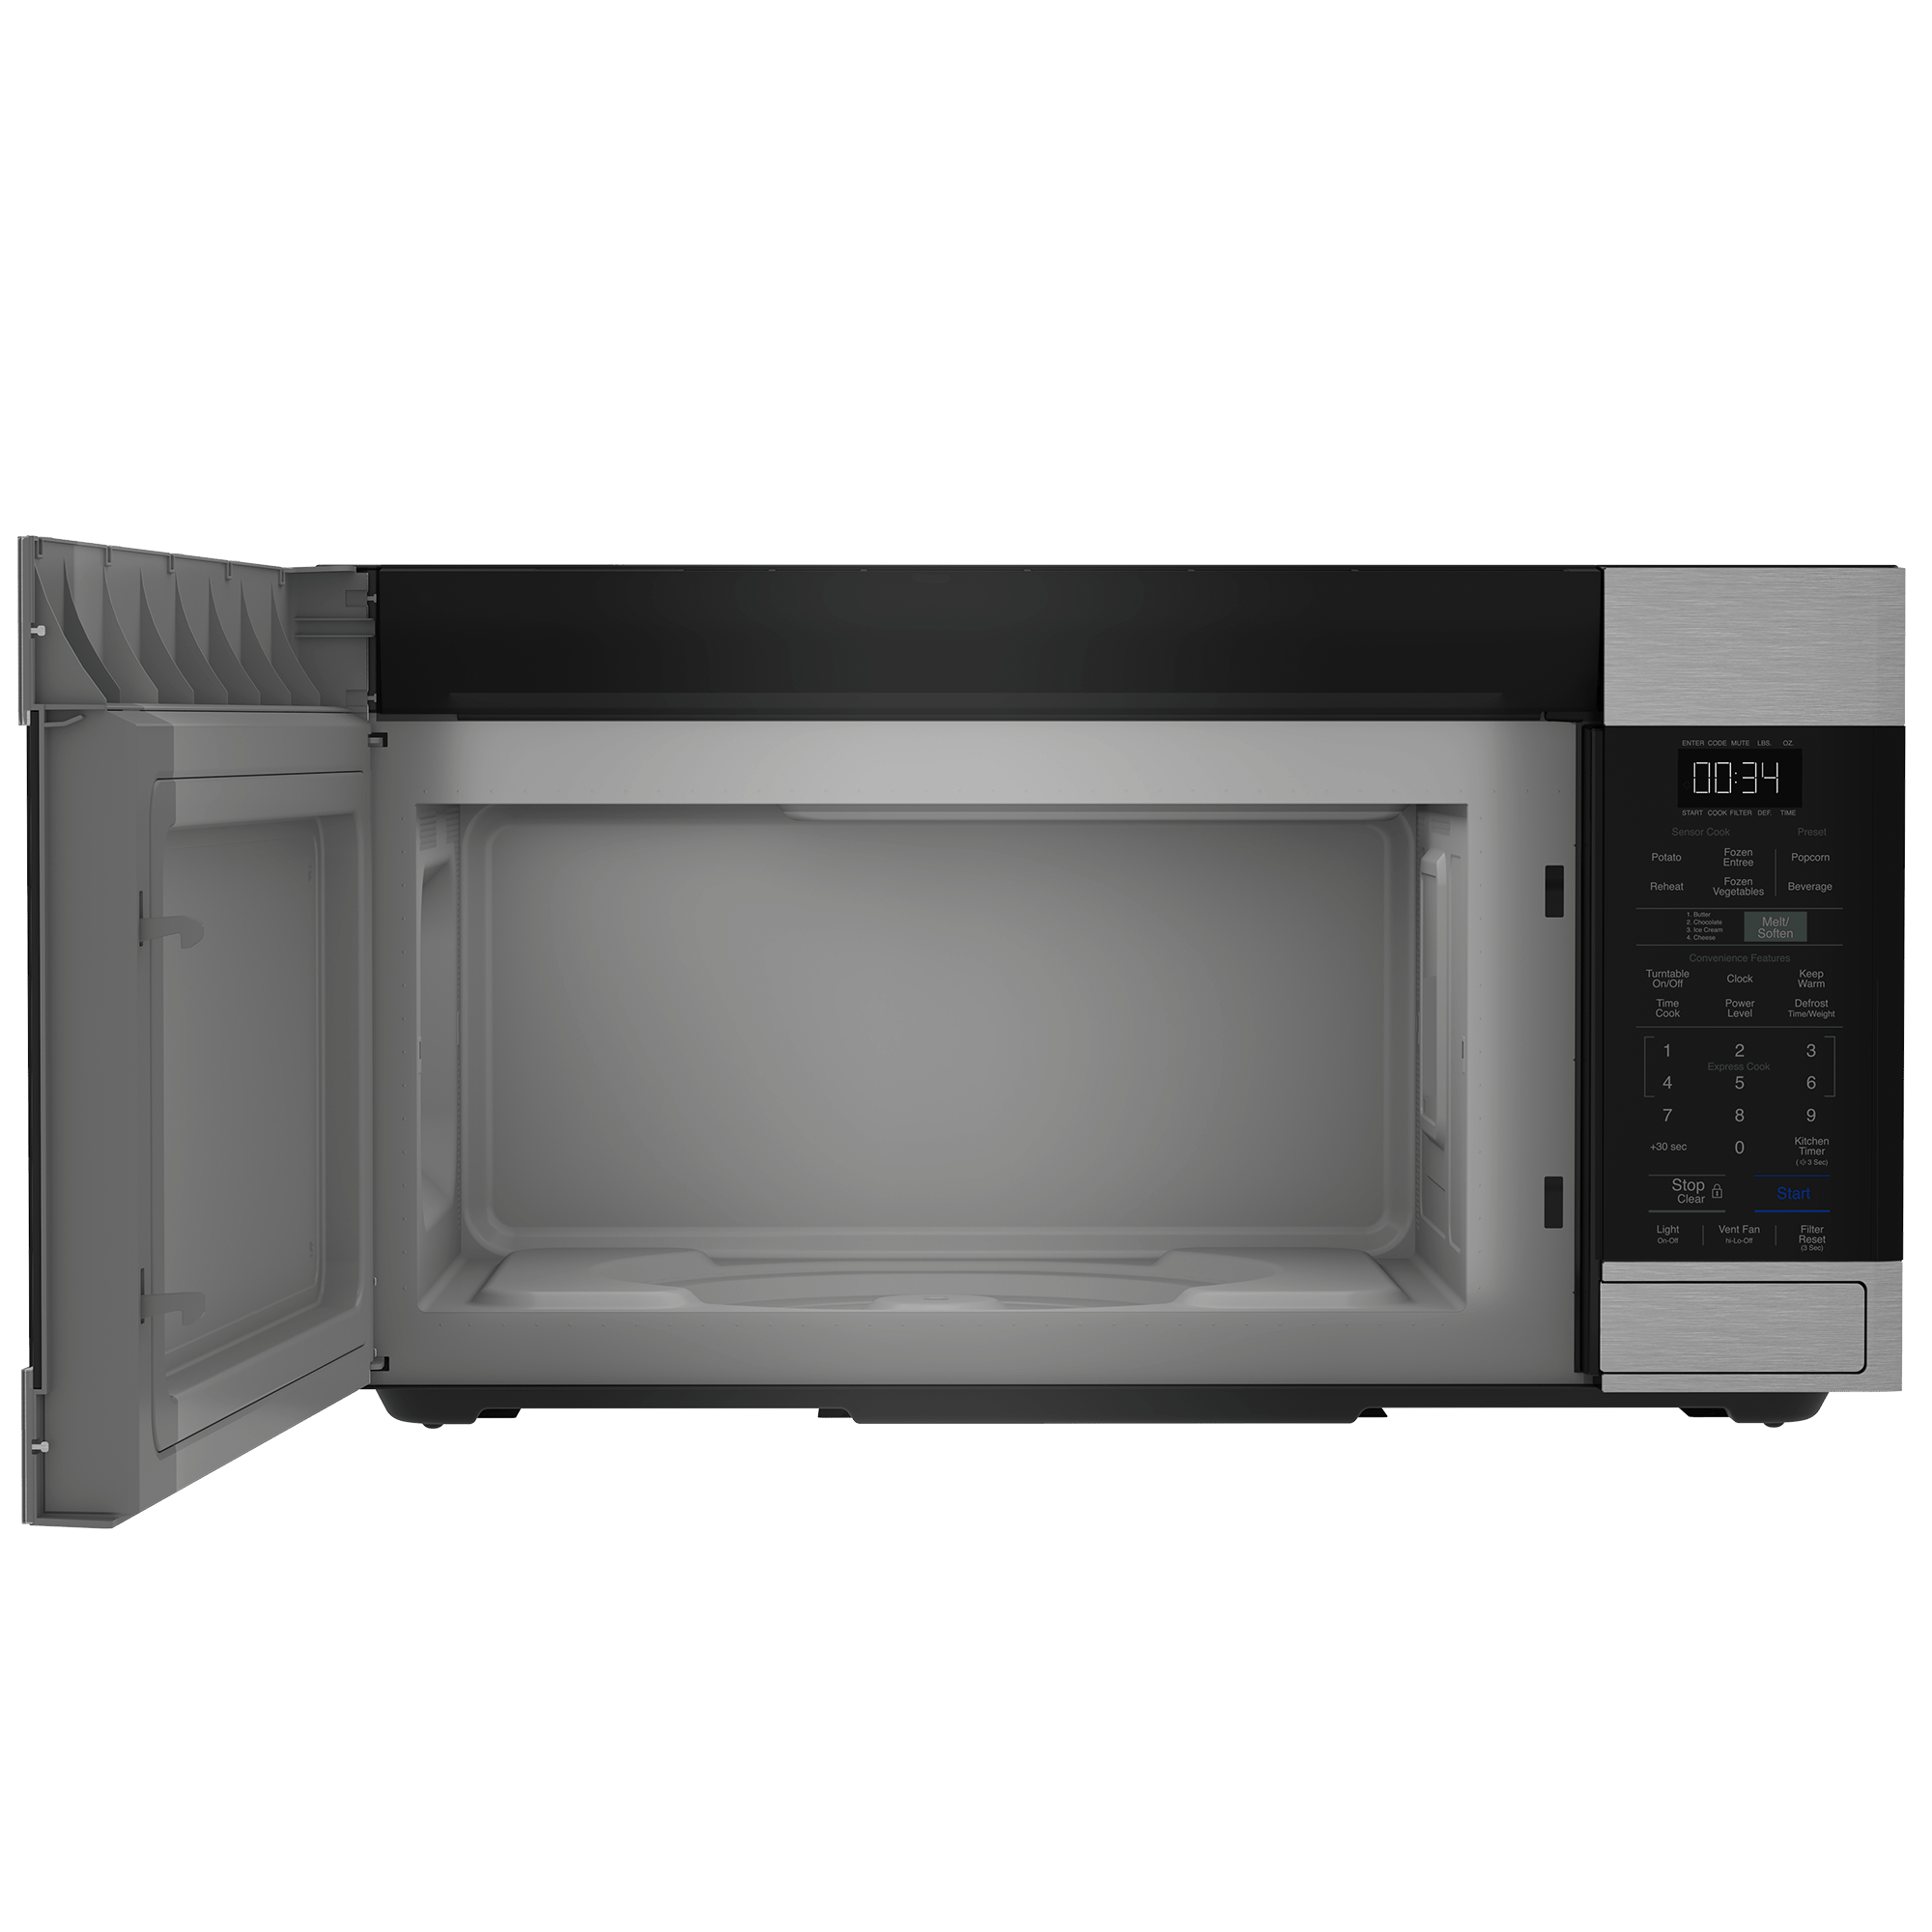 Built-in Microwave (950 W, 44 L)